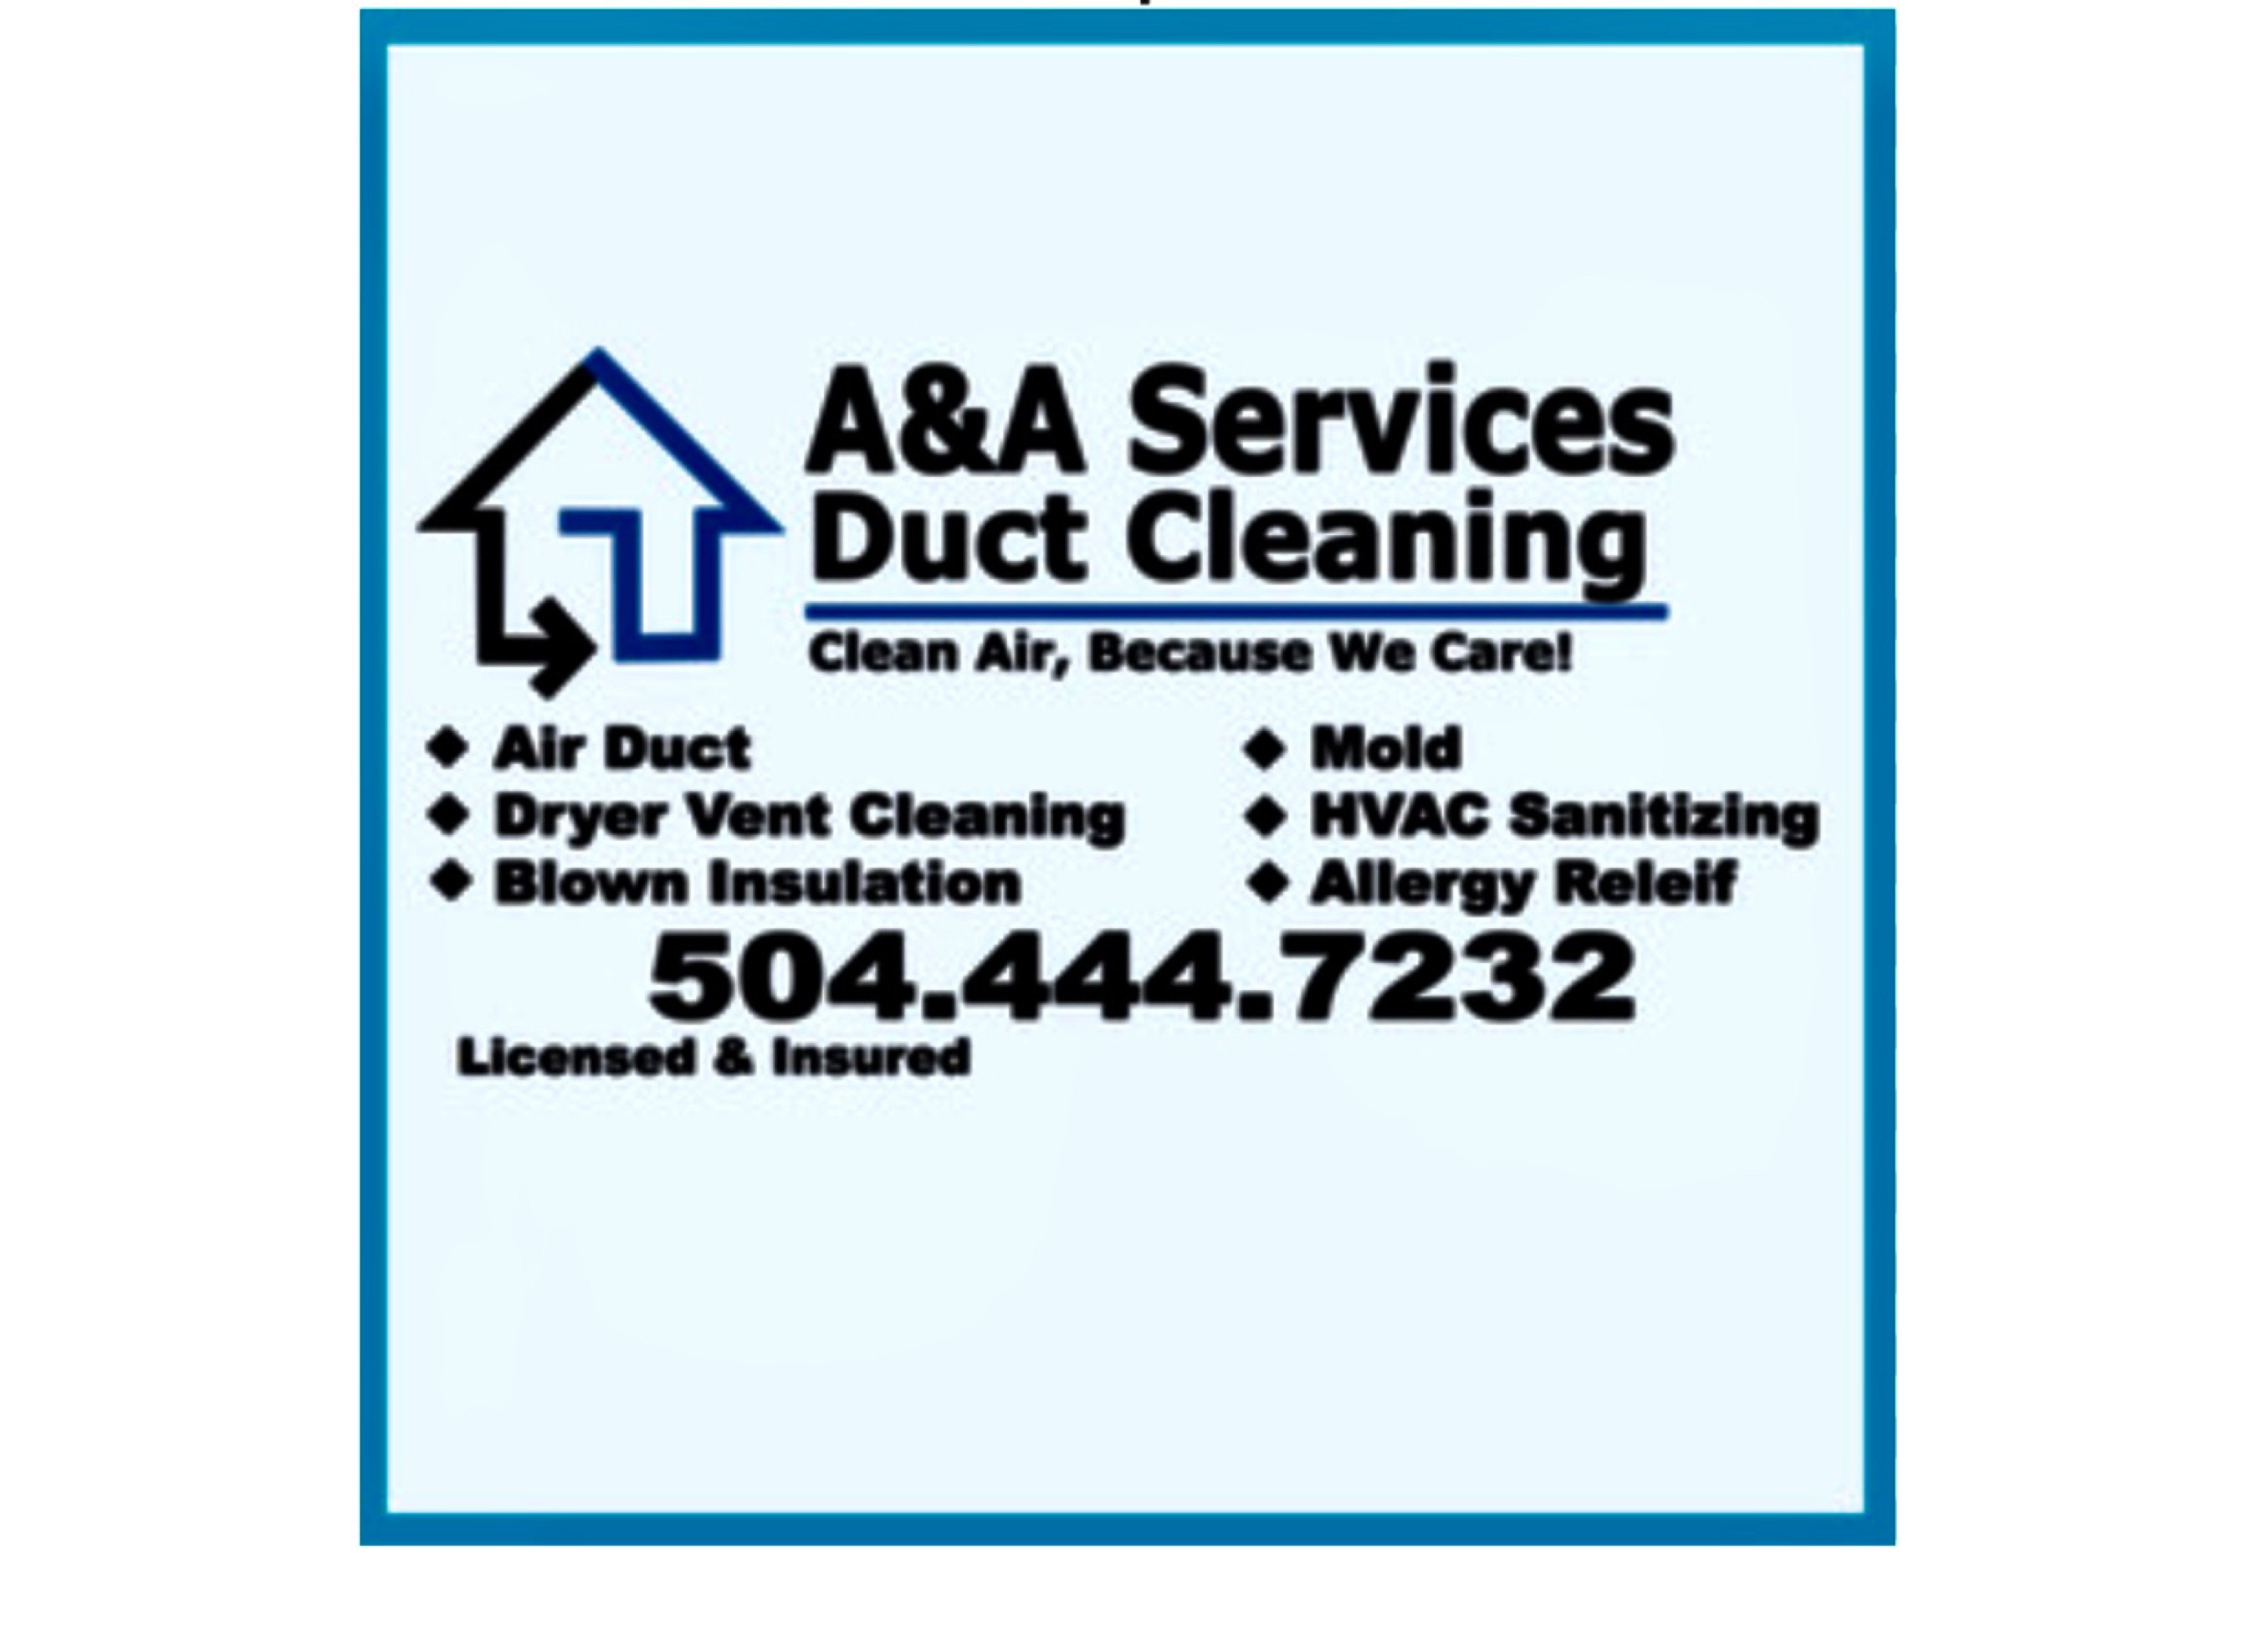 AA Air Duct Cleaning & Installation Services Logo